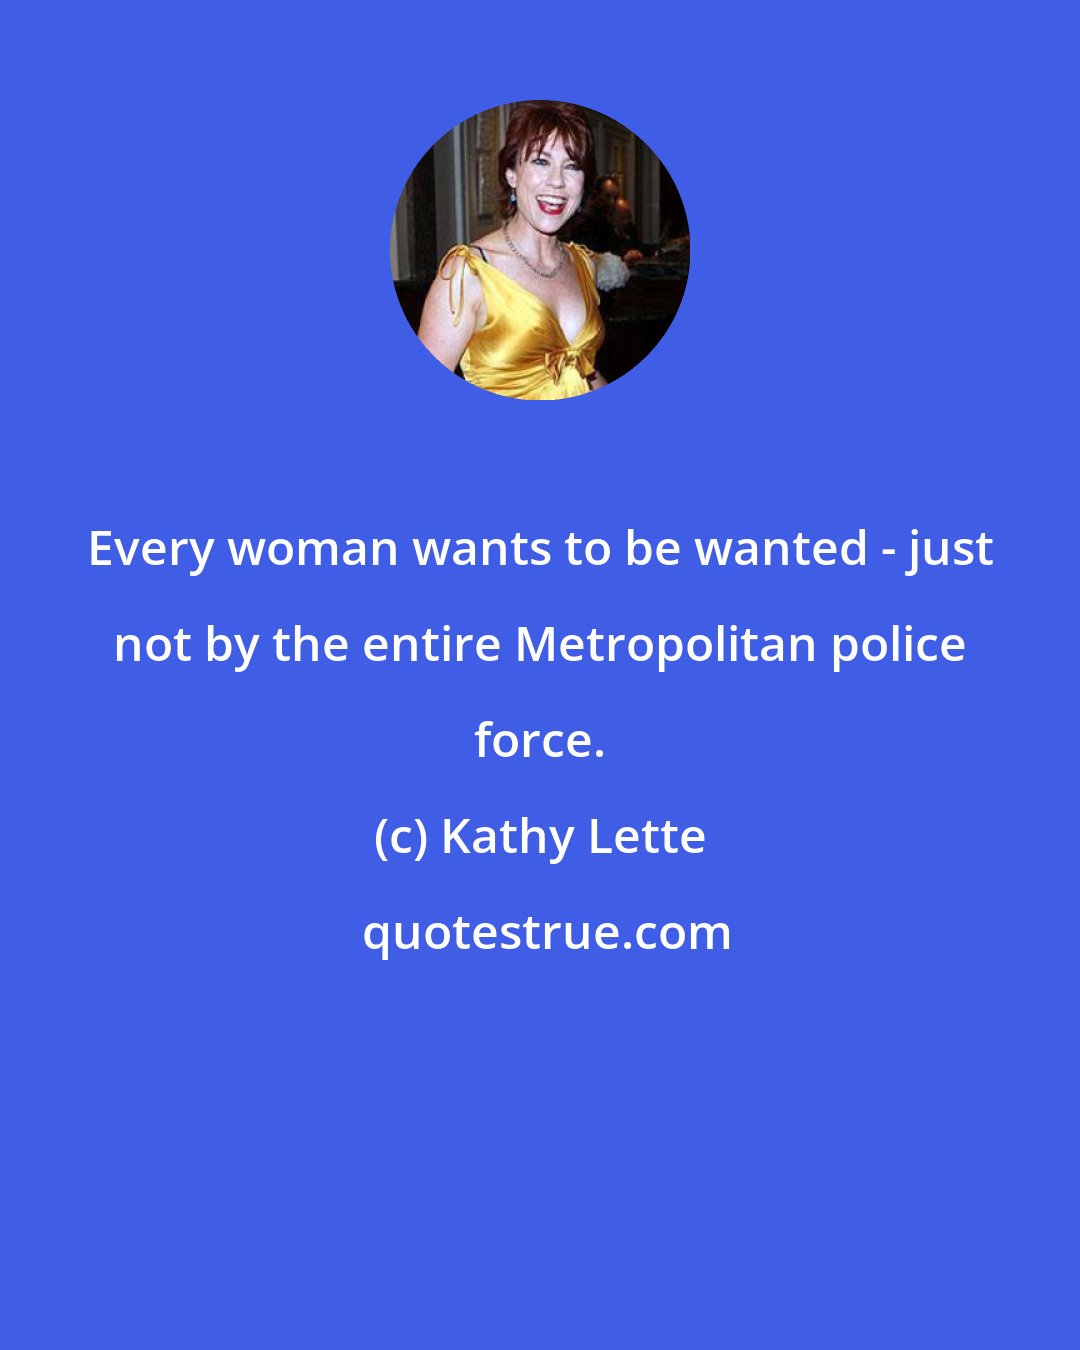 Kathy Lette: Every woman wants to be wanted - just not by the entire Metropolitan police force.